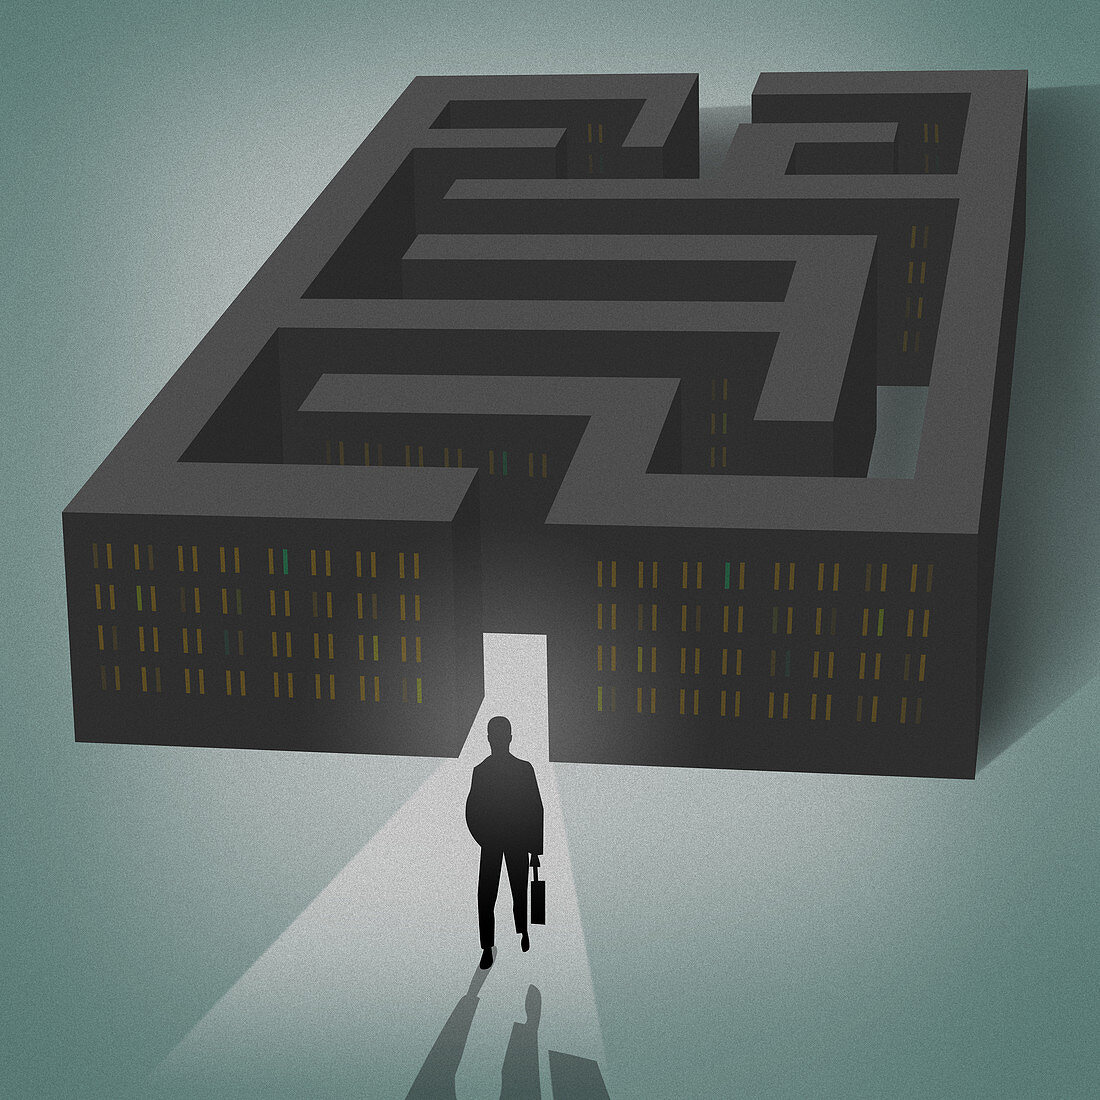 Illustration of businessman coming out of a maze